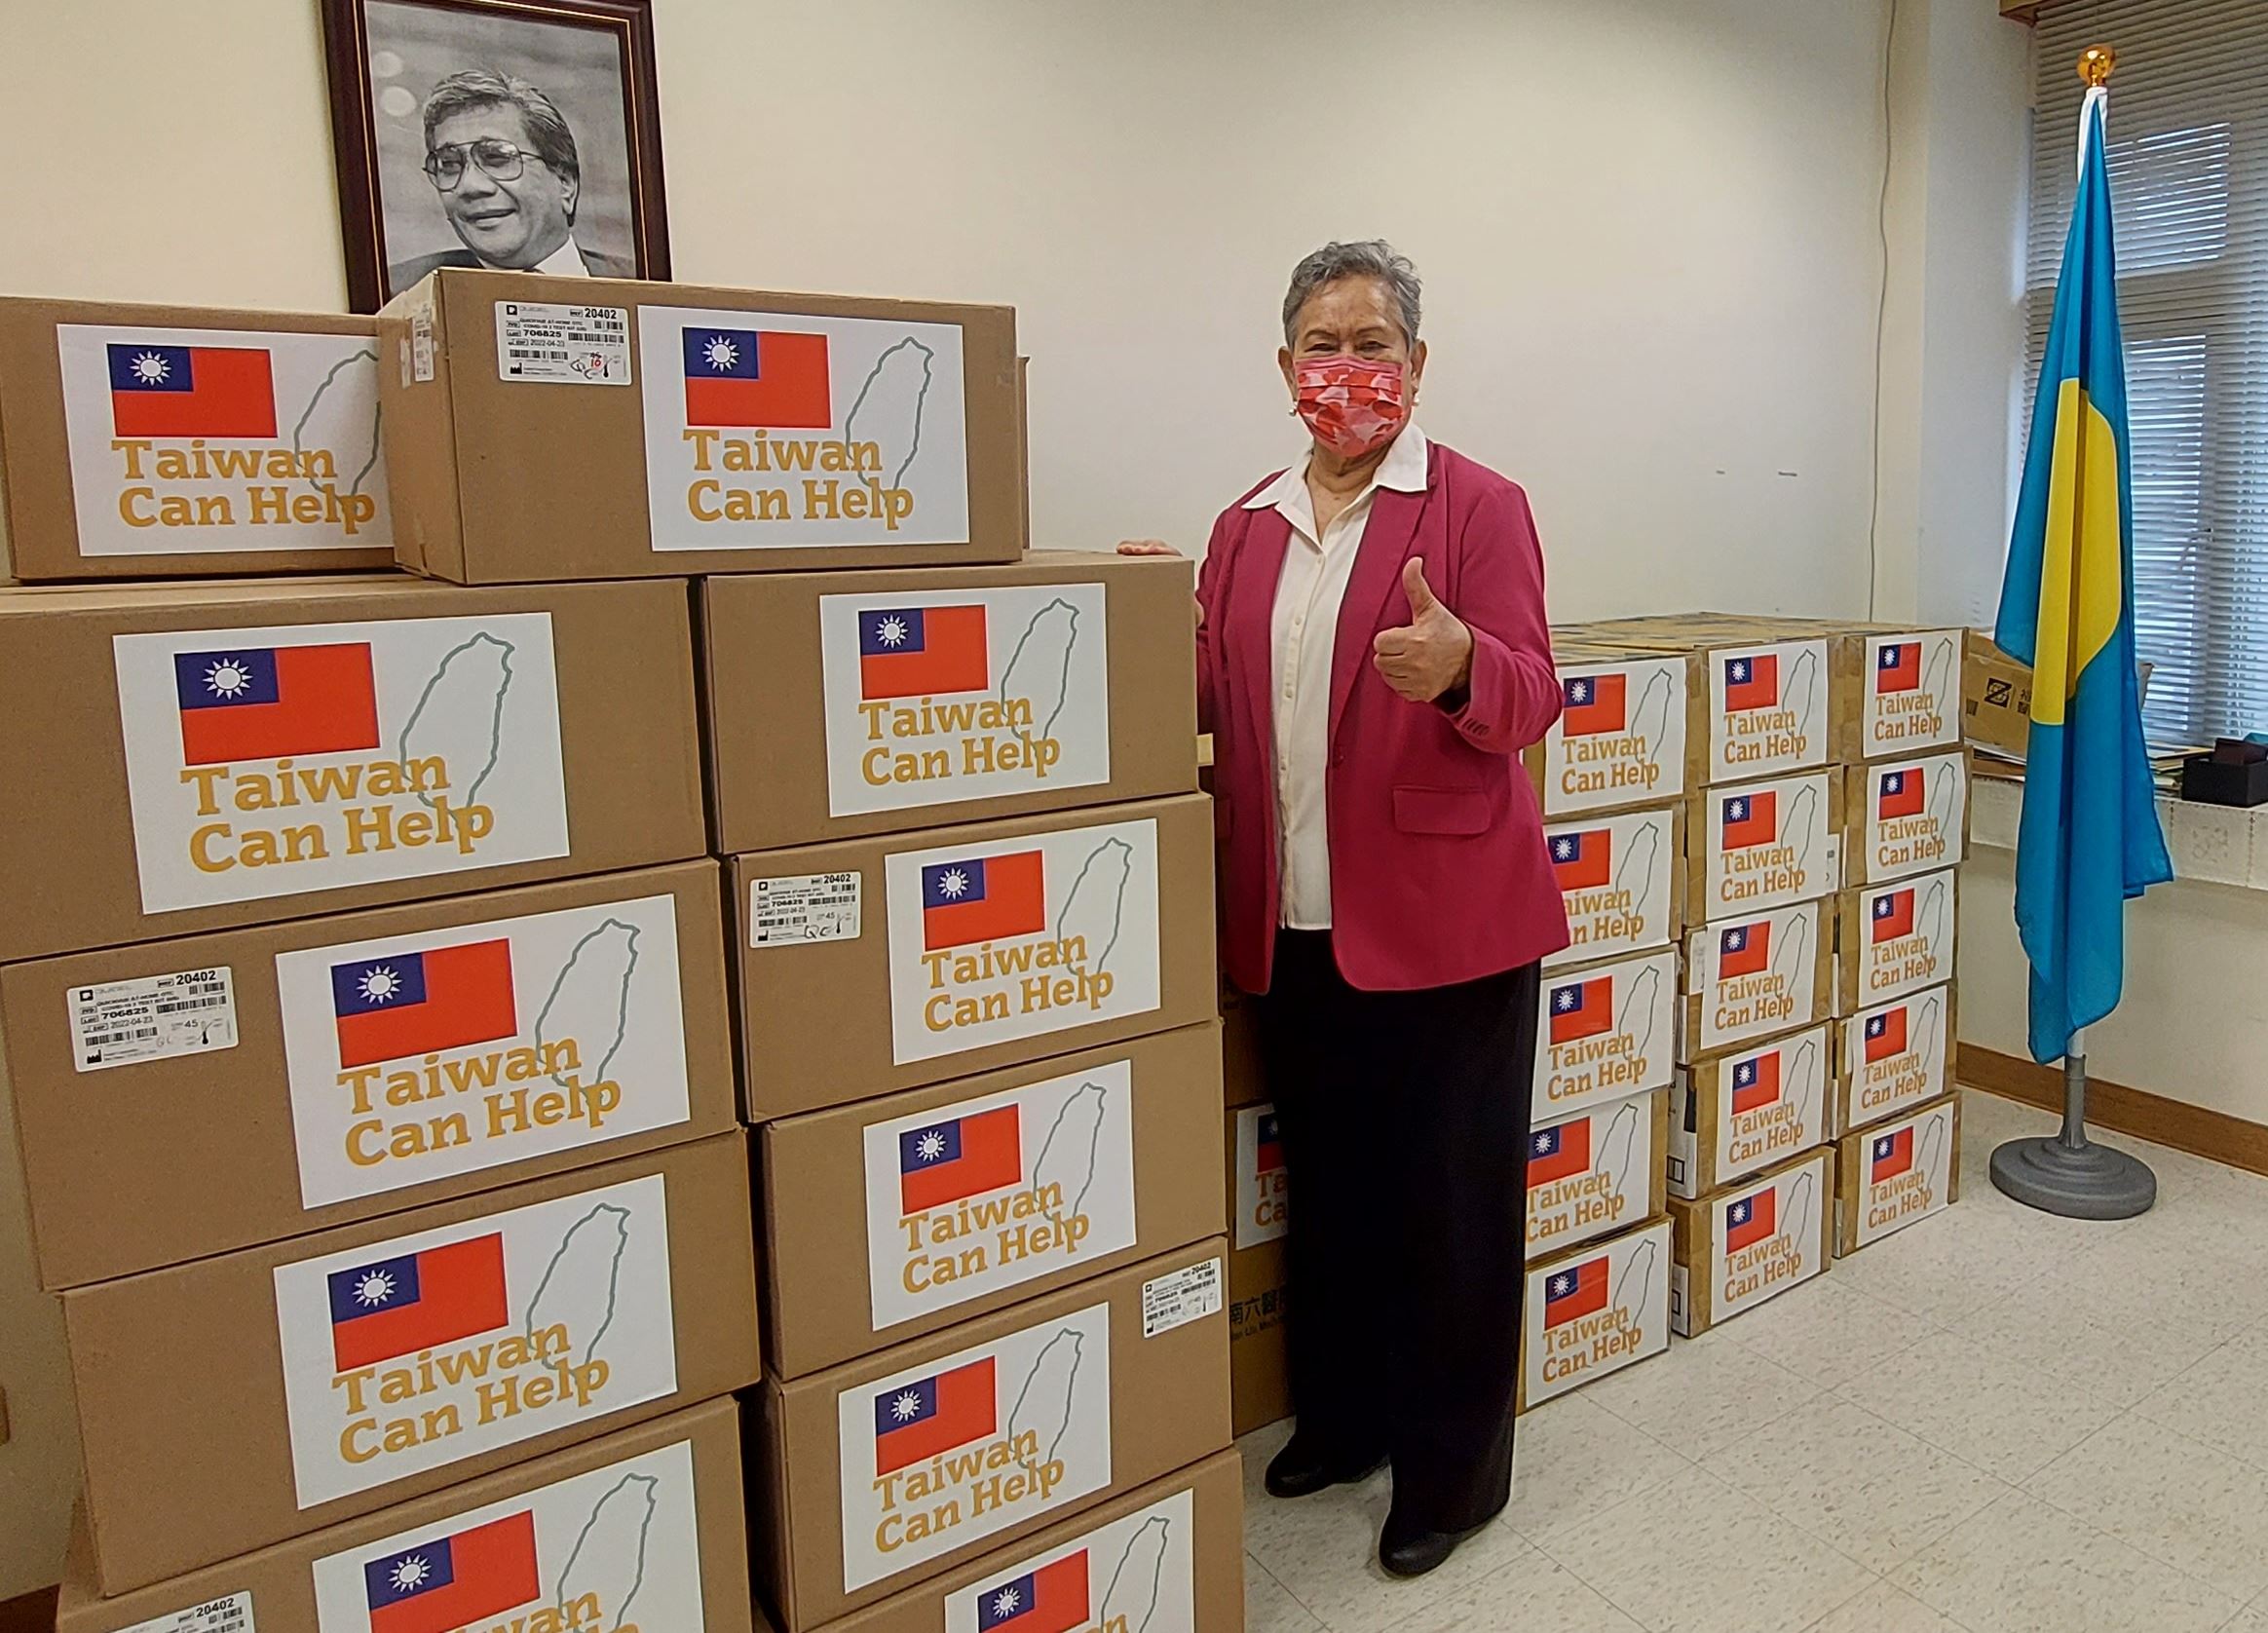 The ambassador at the Embassy of Palau, Dilmei L. Olkeriil, received the supplies as the representative of Palau. (Photo / Retrieved from Kaohsiung City Government)